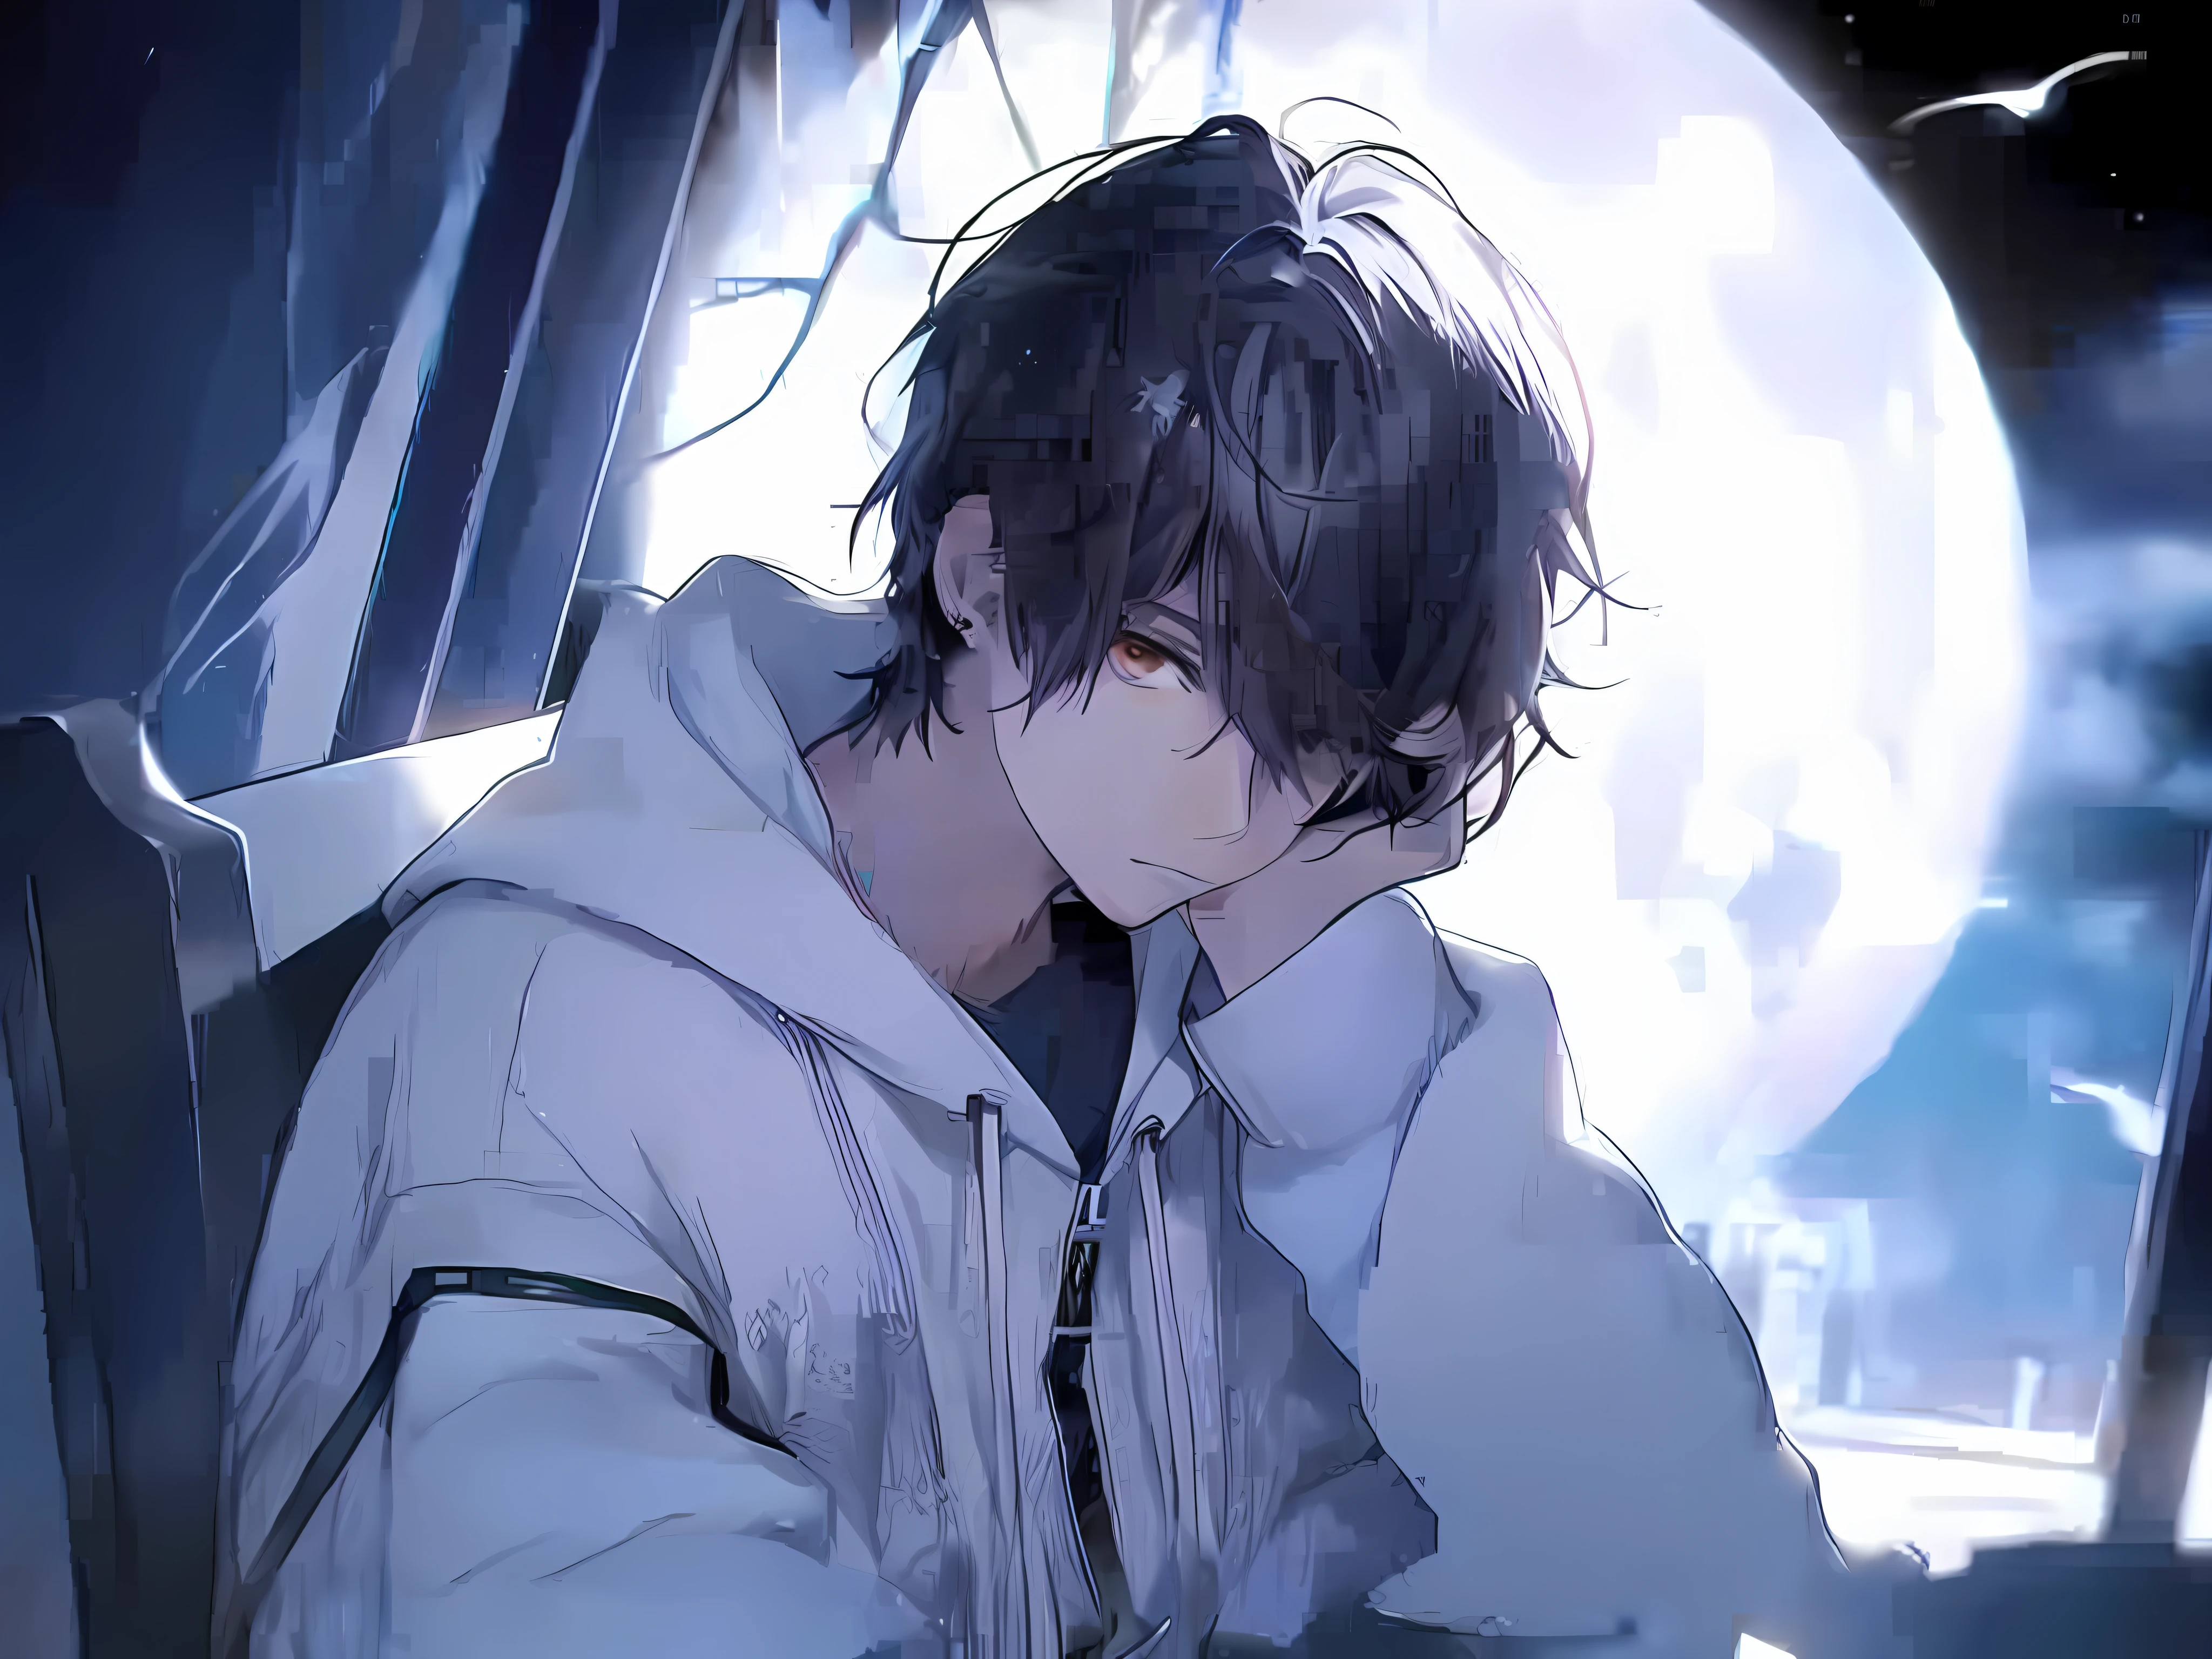 anime boy sitting on a bench in front of a full moon, handsome anime pose, anime handsome man, anime boy, young anime man, male anime style, tall anime guy with blue eyes, male anime character, high quality anime artstyle, guweiz, inspired by Okumura Togyu, moon behind him, nightcore, handsome guy in demon slayer art